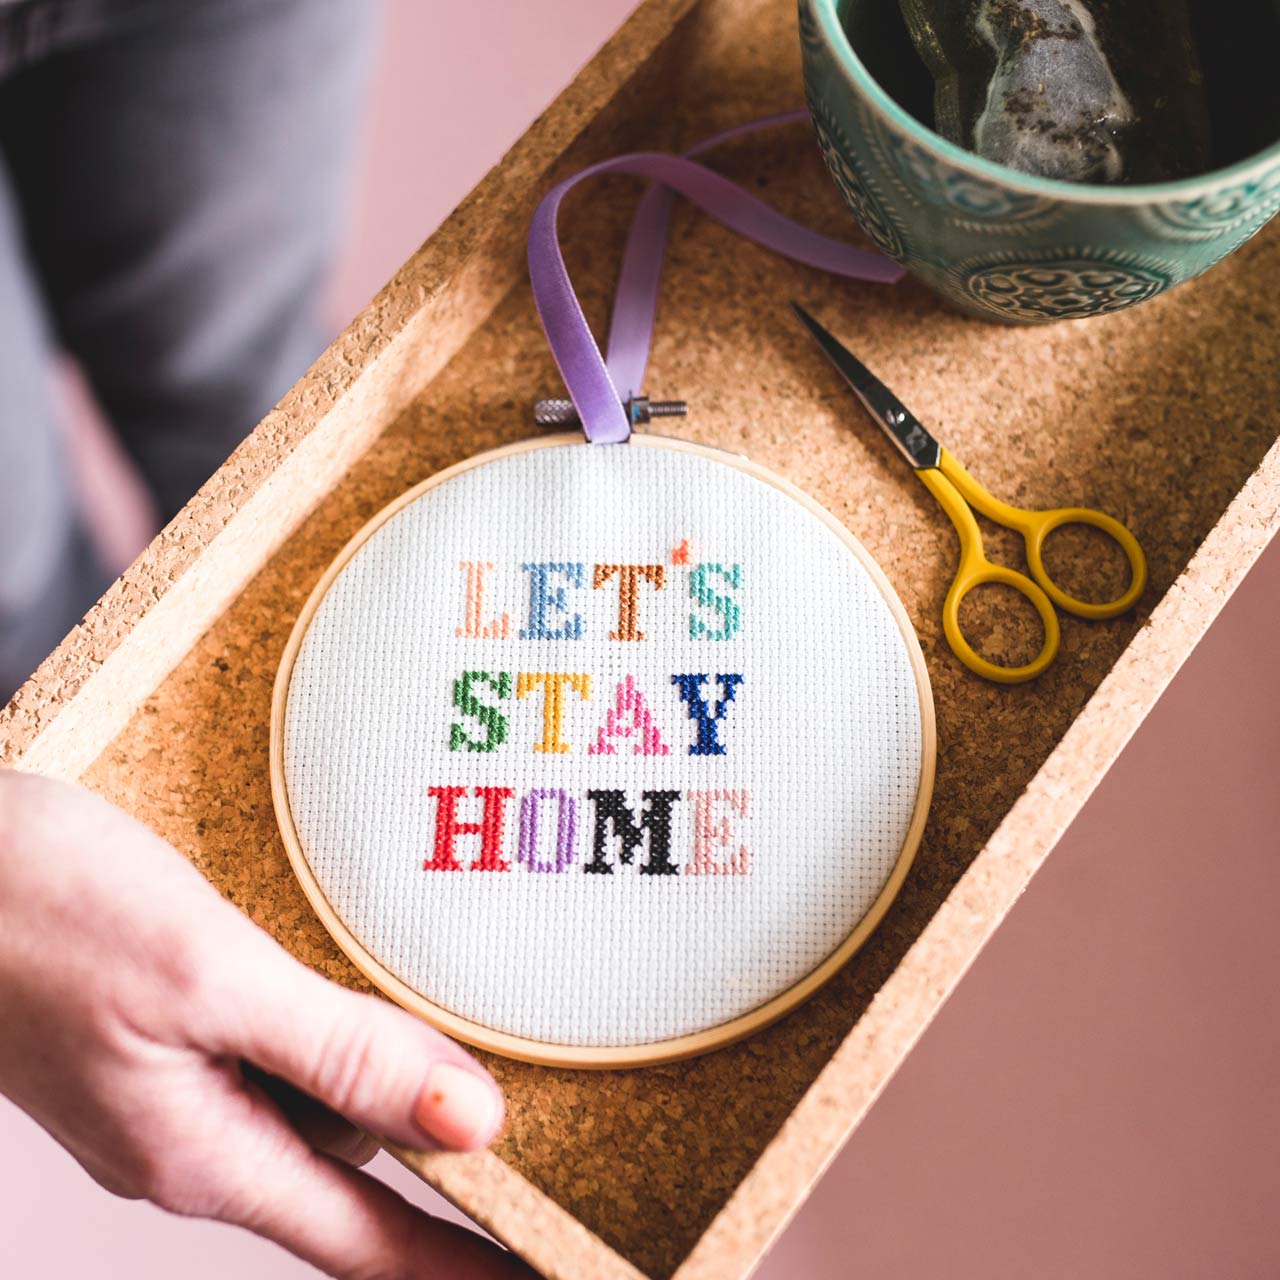 Let's Stay Home Cross Stitch Kit